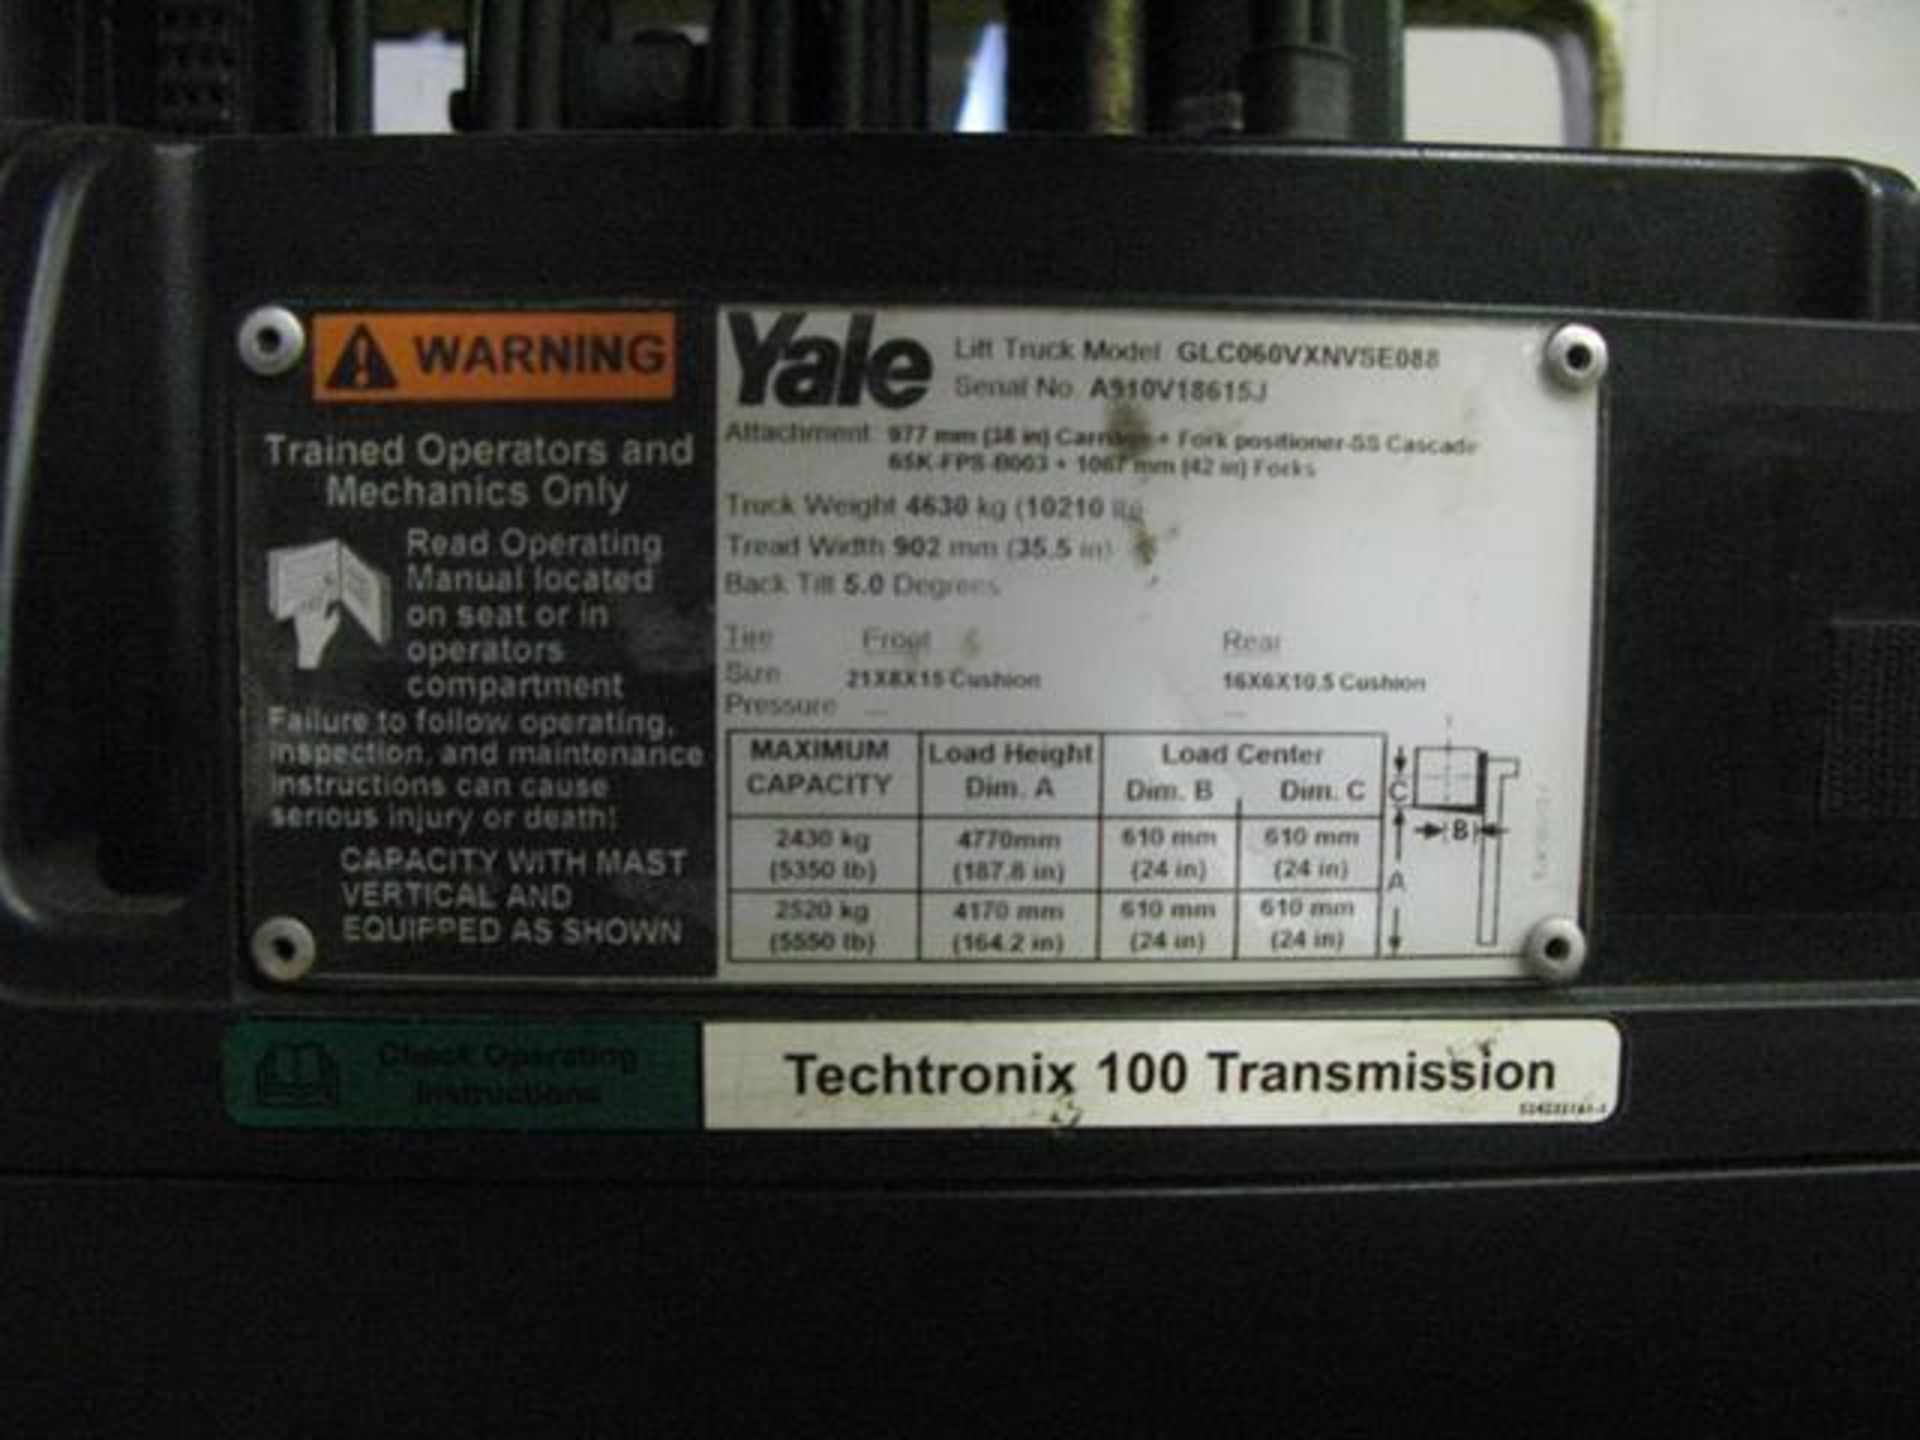 YALE, GLC060VX, 6,000 LBS., FORKLIFT - Image 9 of 9